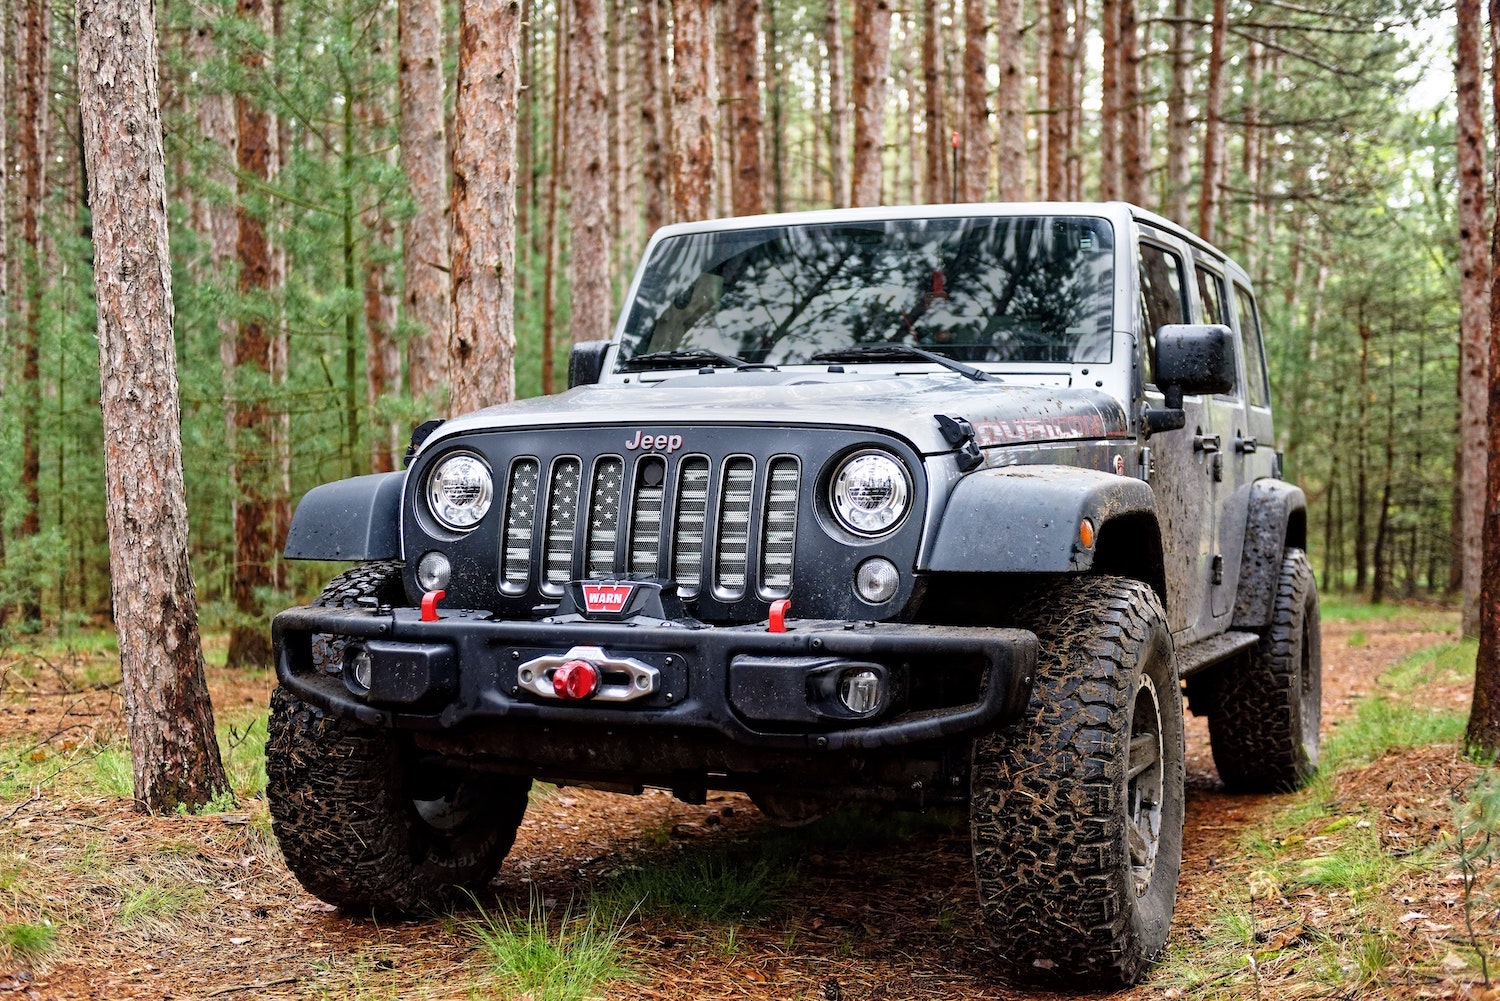 Modified Jeep Wrangler 4x4 with a winch parked in the woods.